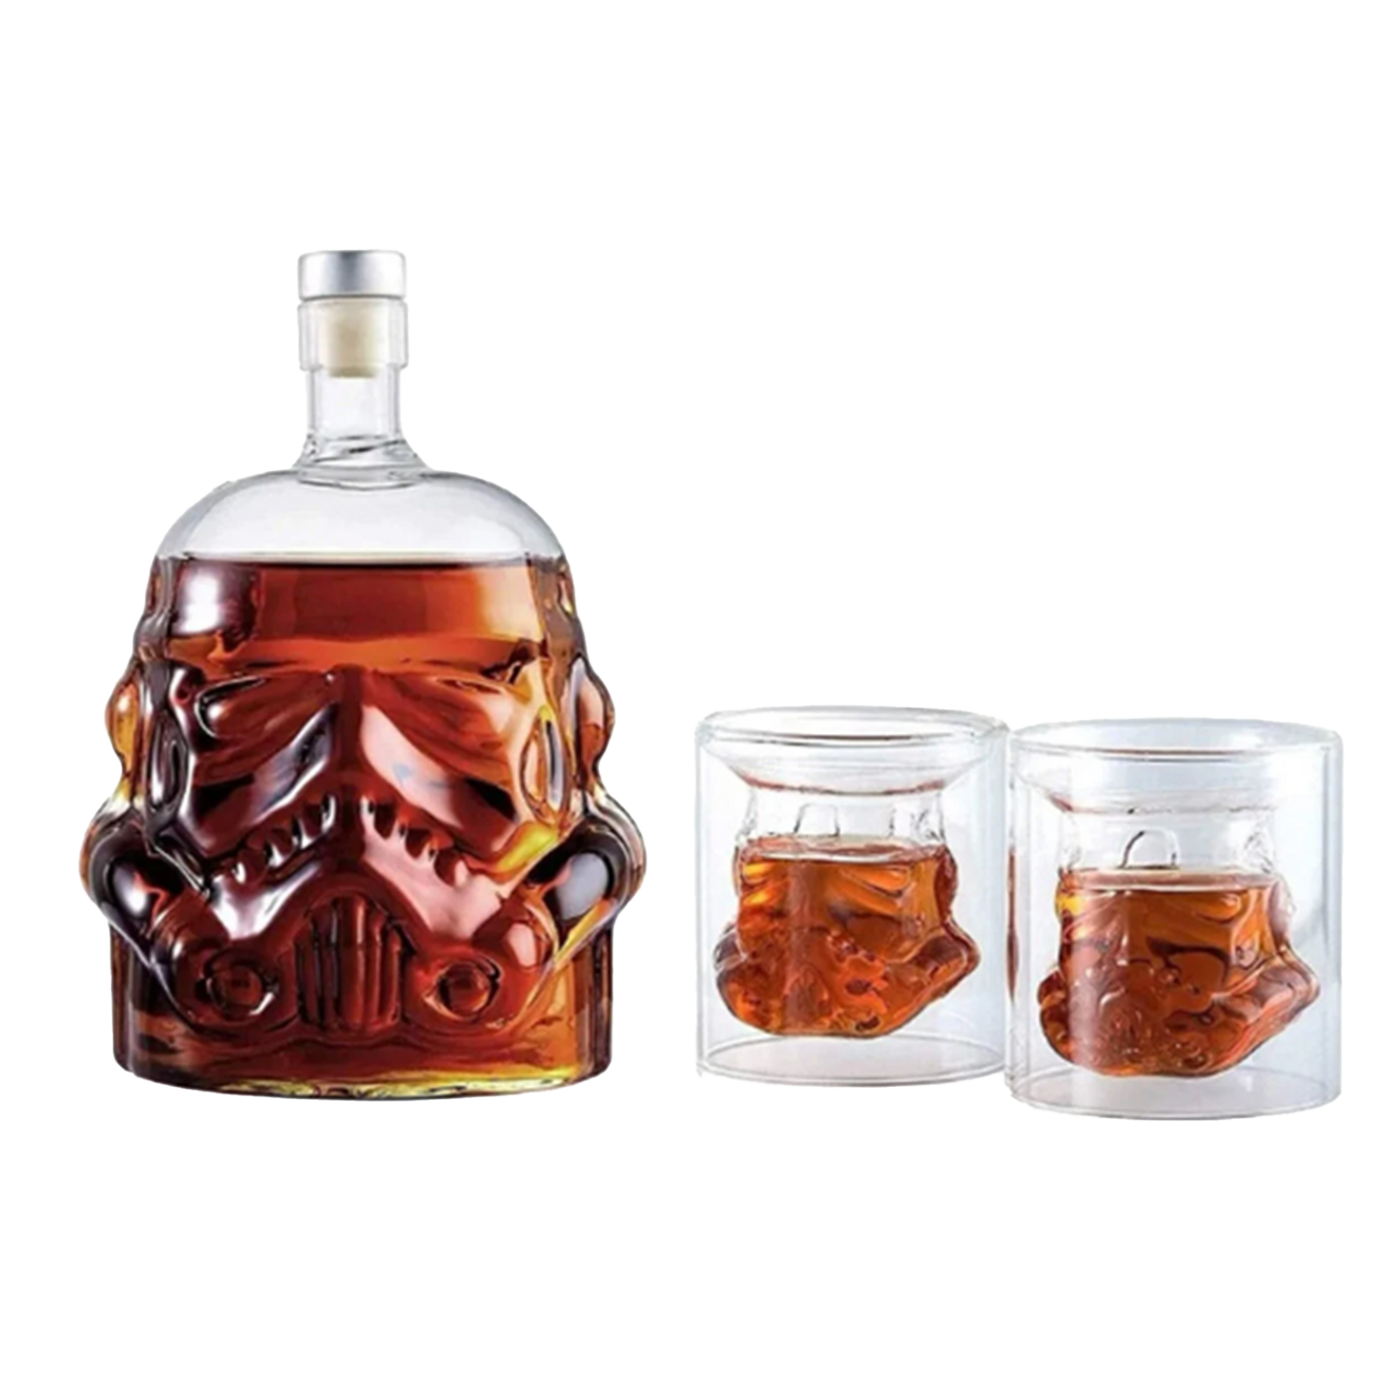 Transparent Creative Whiskey Decanter Set Bottle with 2 Wine Glasses 150ml for liquor, Bourbon, Scotch, Vodka, Father's Day Gift for Men Women